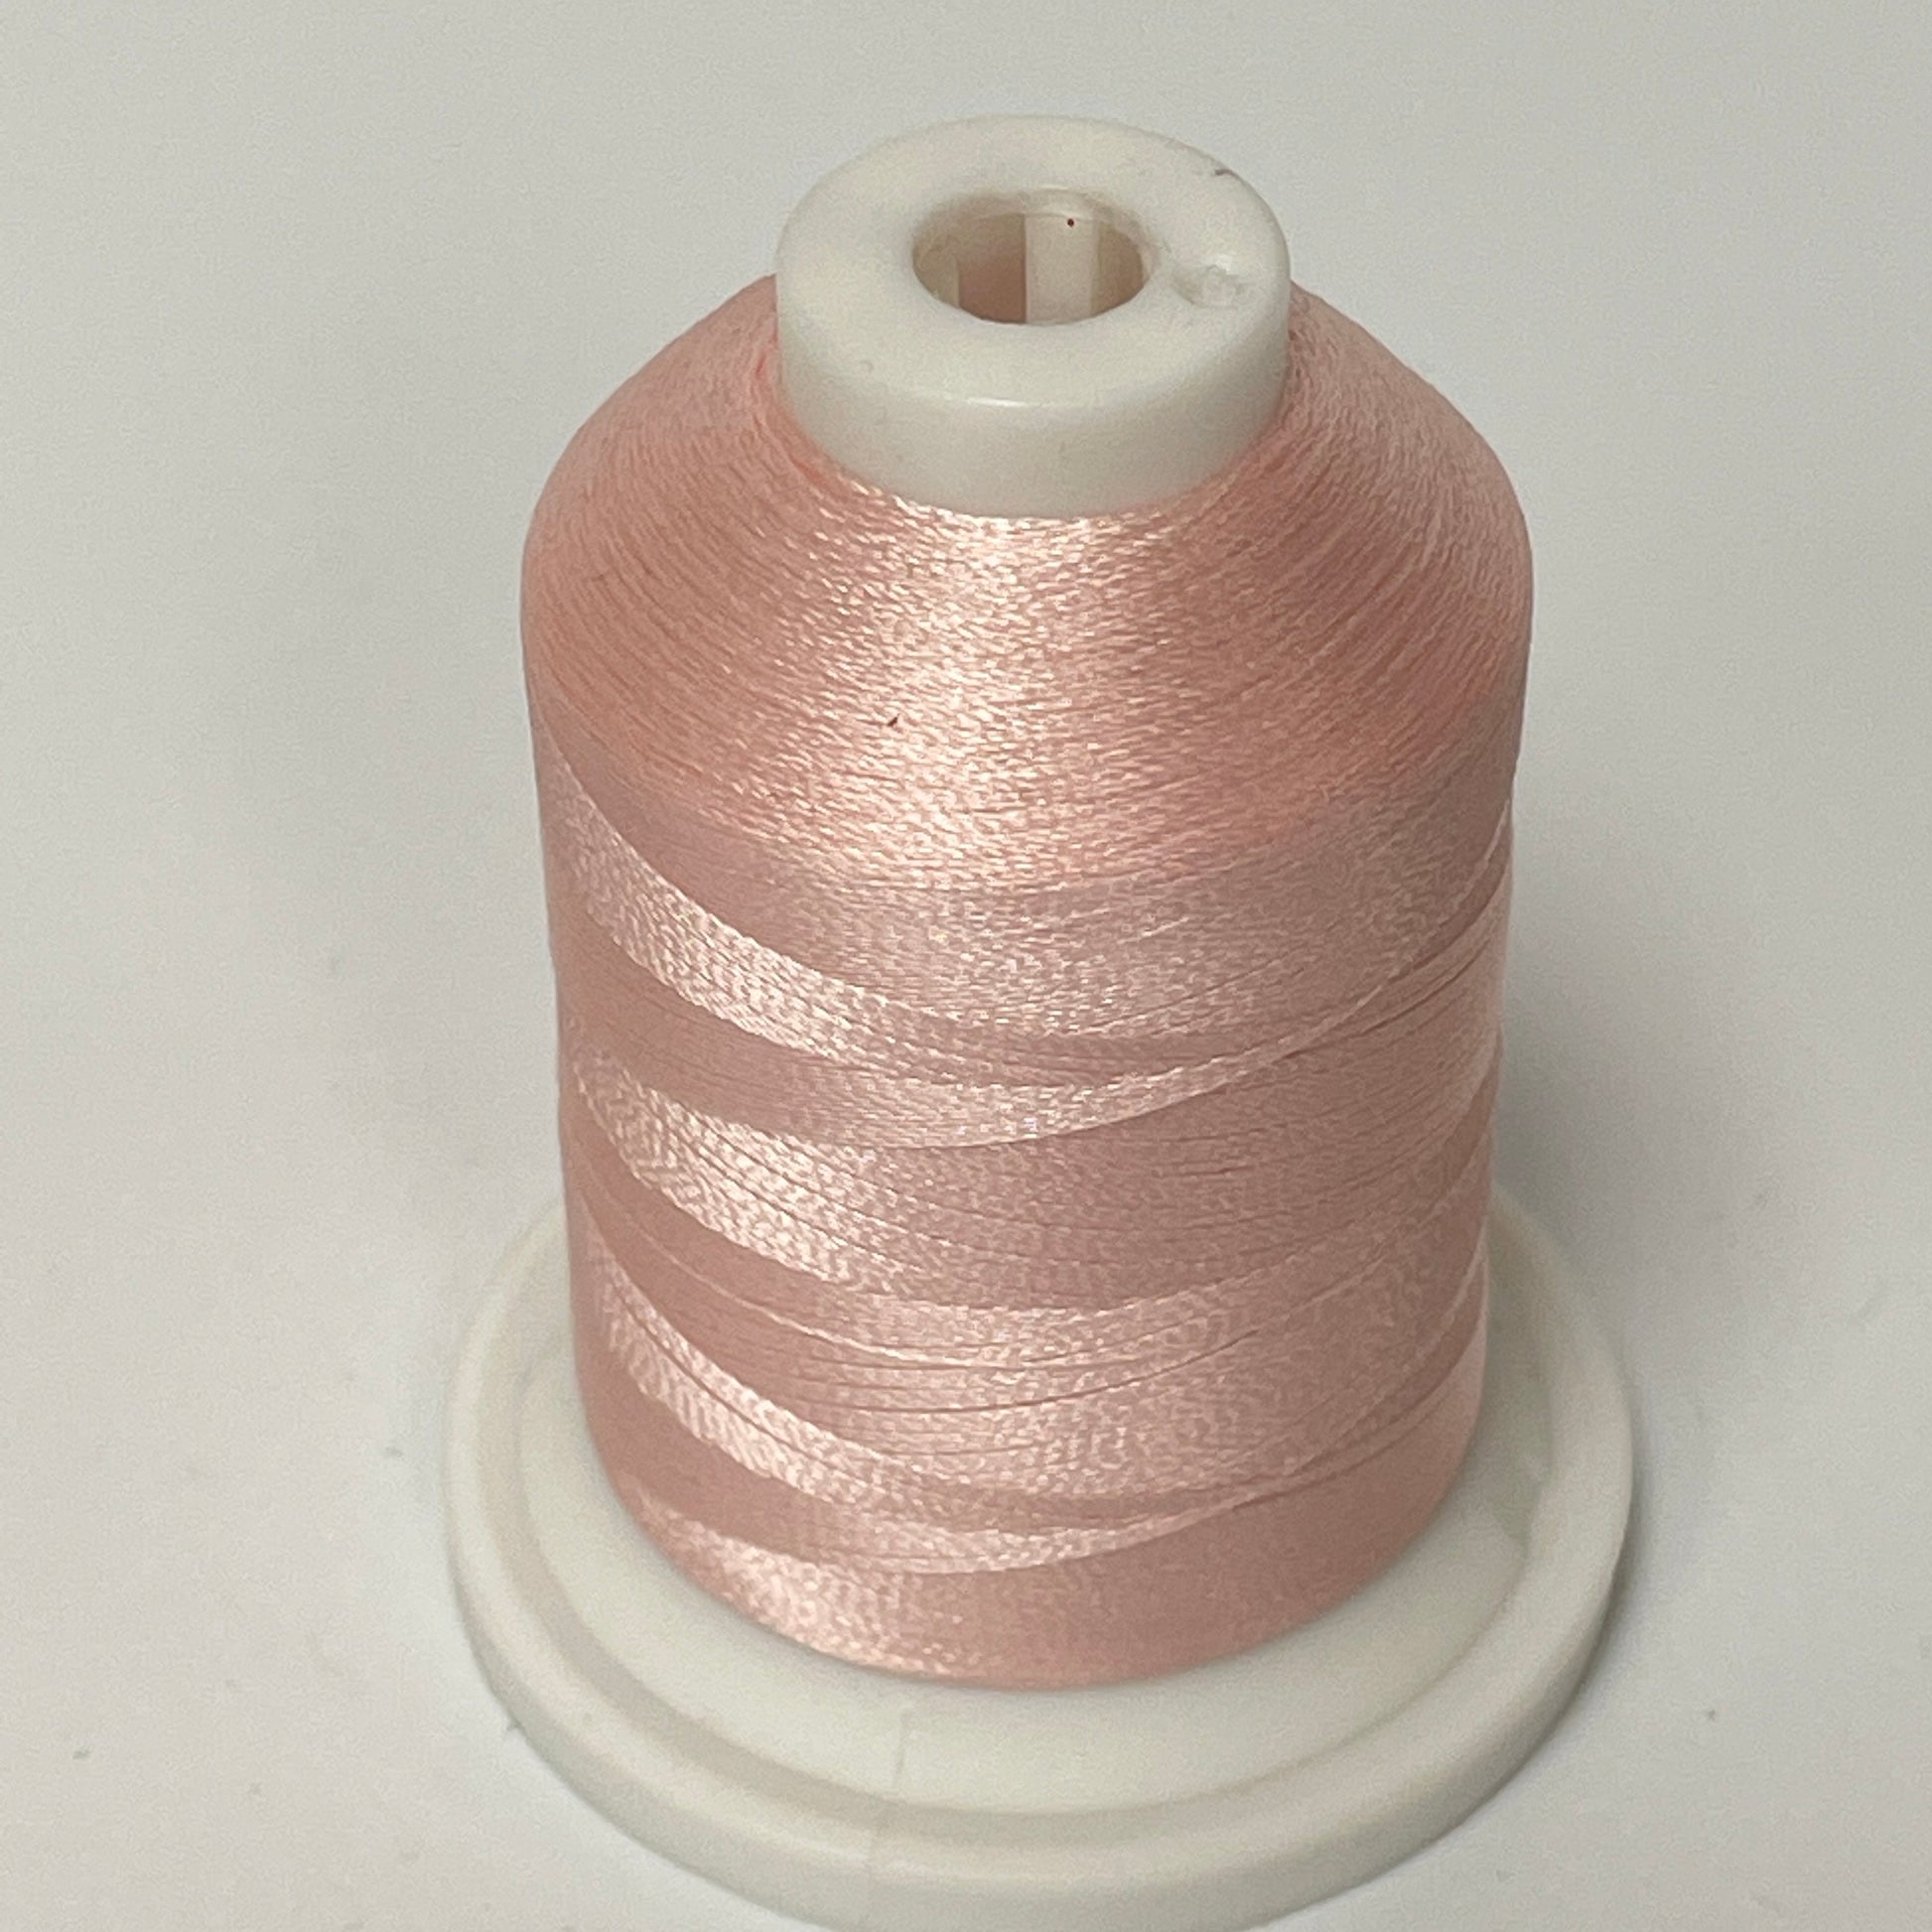 ETP800 Brother PaceSetter Pro Embroidery Thread - 1100 yd Spool